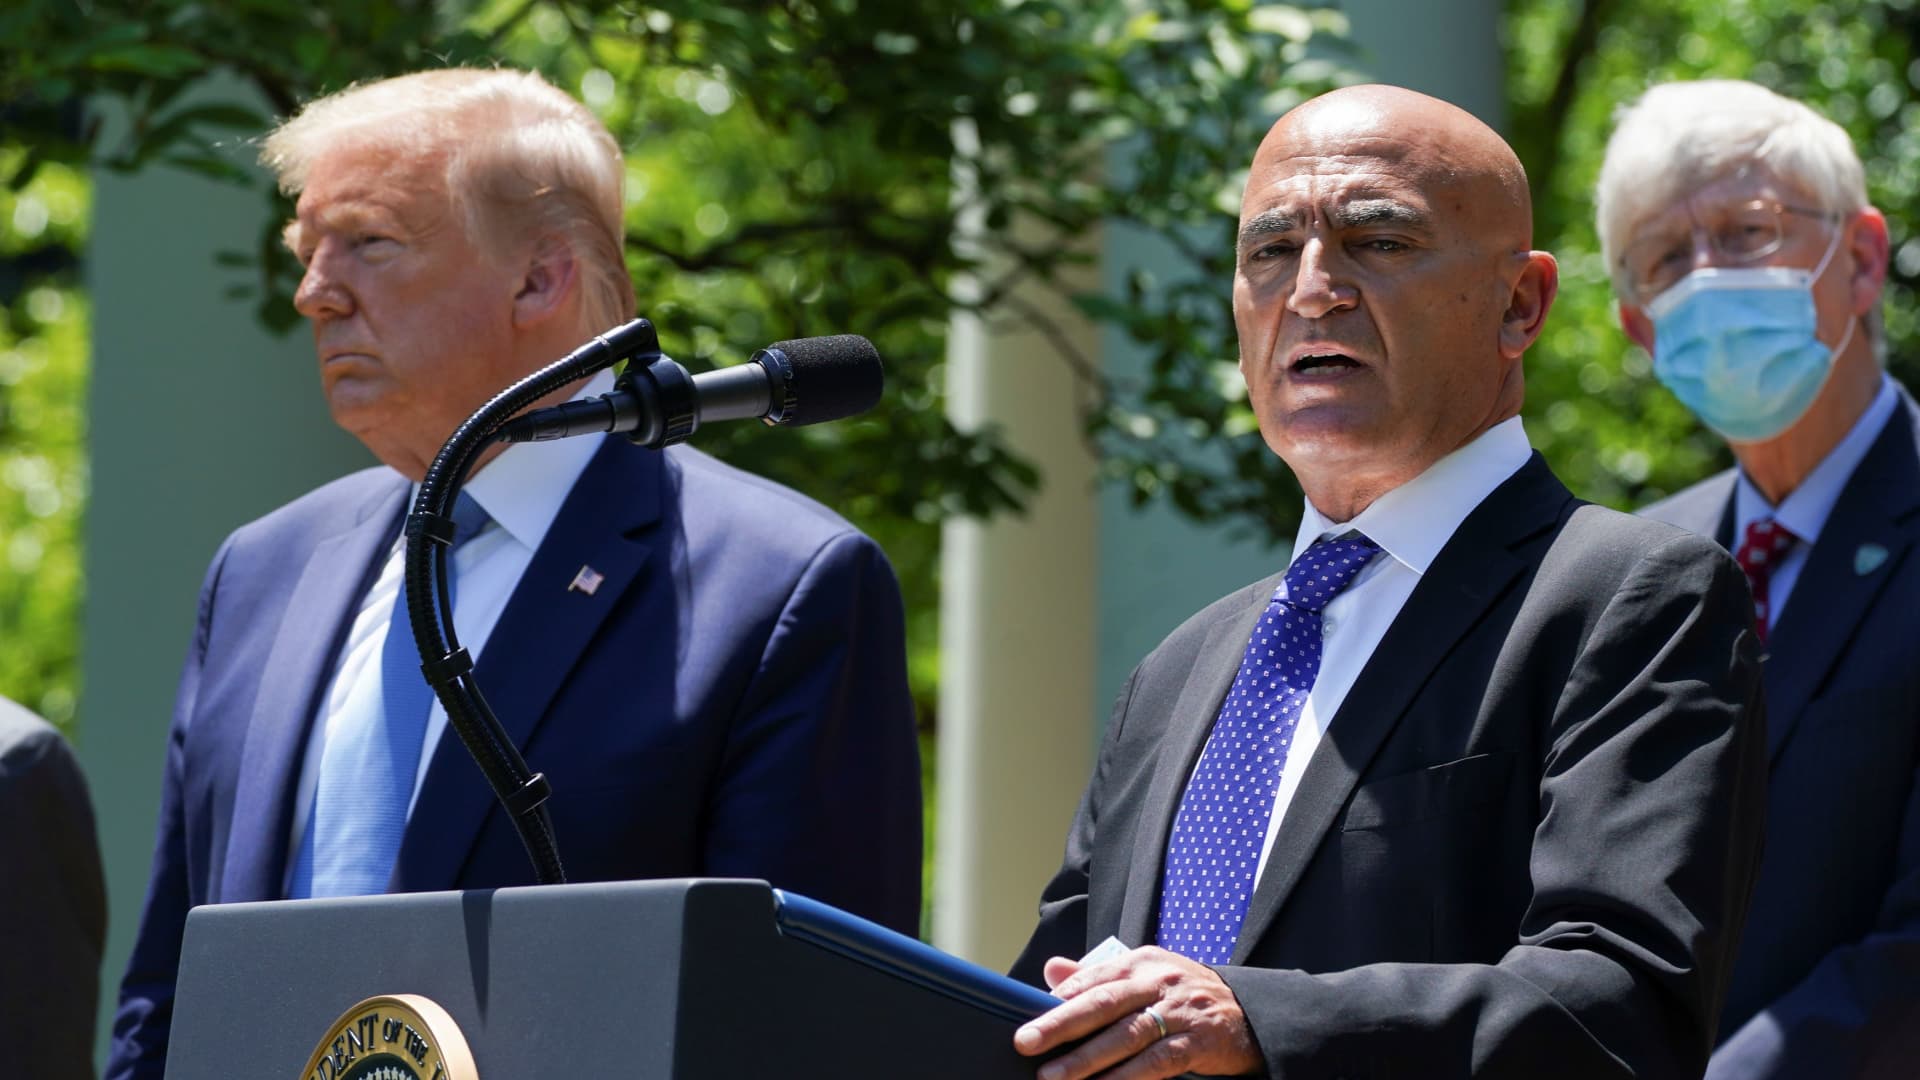 Former GlaxoSmithKline pharmaceutical executive Moncef Slaoui, who will serve as chief adviser on the effort to find a vaccine for the coronavirus disease (COVID-19) pandemic, speaks as President Donald Trump listens during a coronavirus disease response event in the Rose Garden at the White House in Washington.